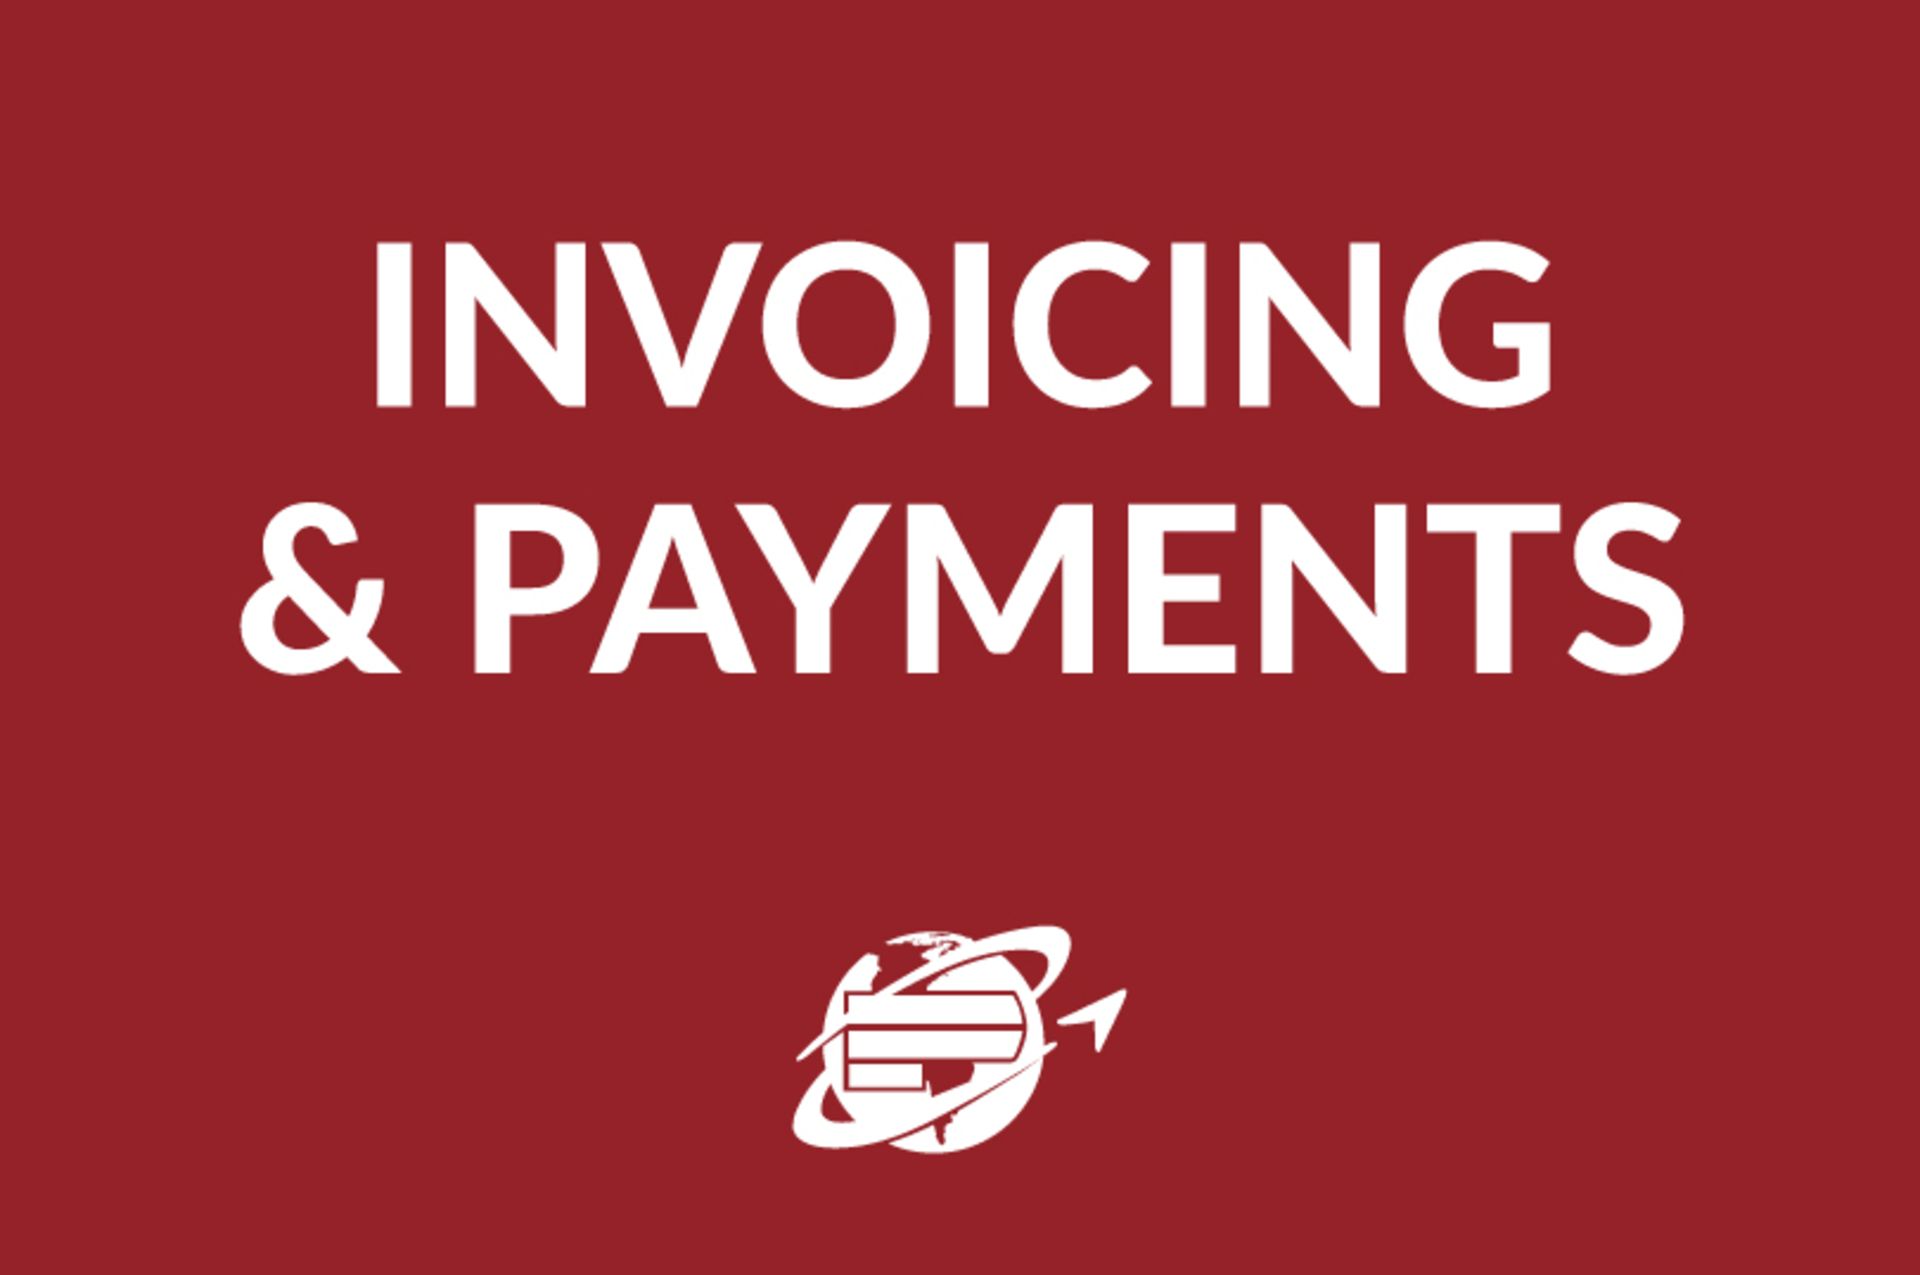 Invoices will be sent to all Buyers via email no later than 24 hours after the ale closes. All invoi